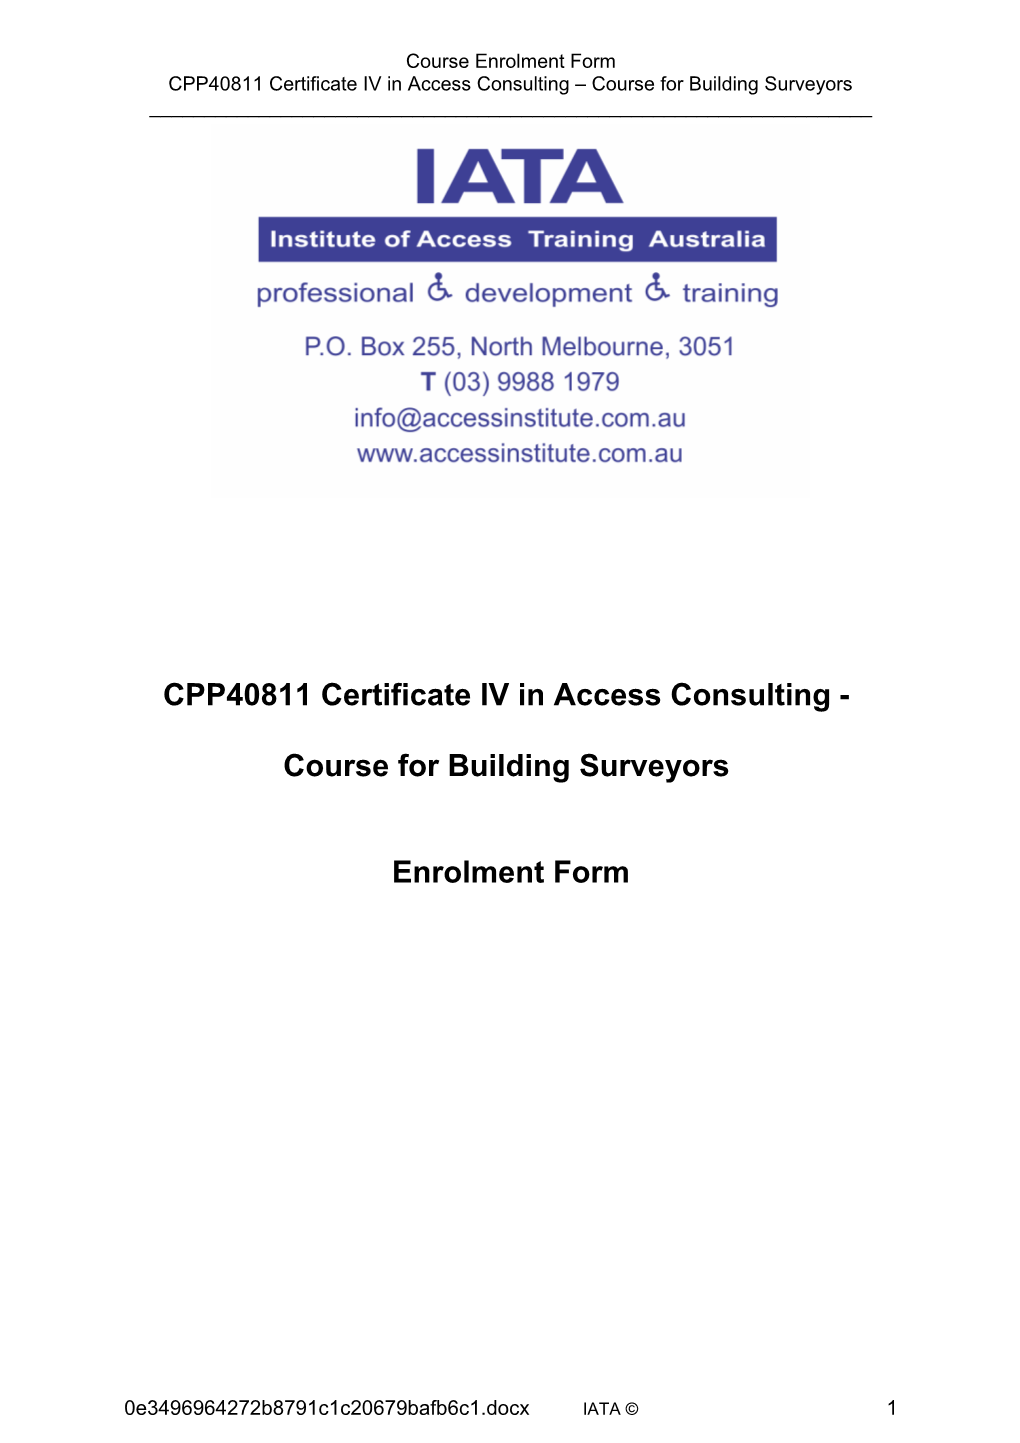 CPP40811 Certificate IV in Access Consulting Course for Building Surveyors